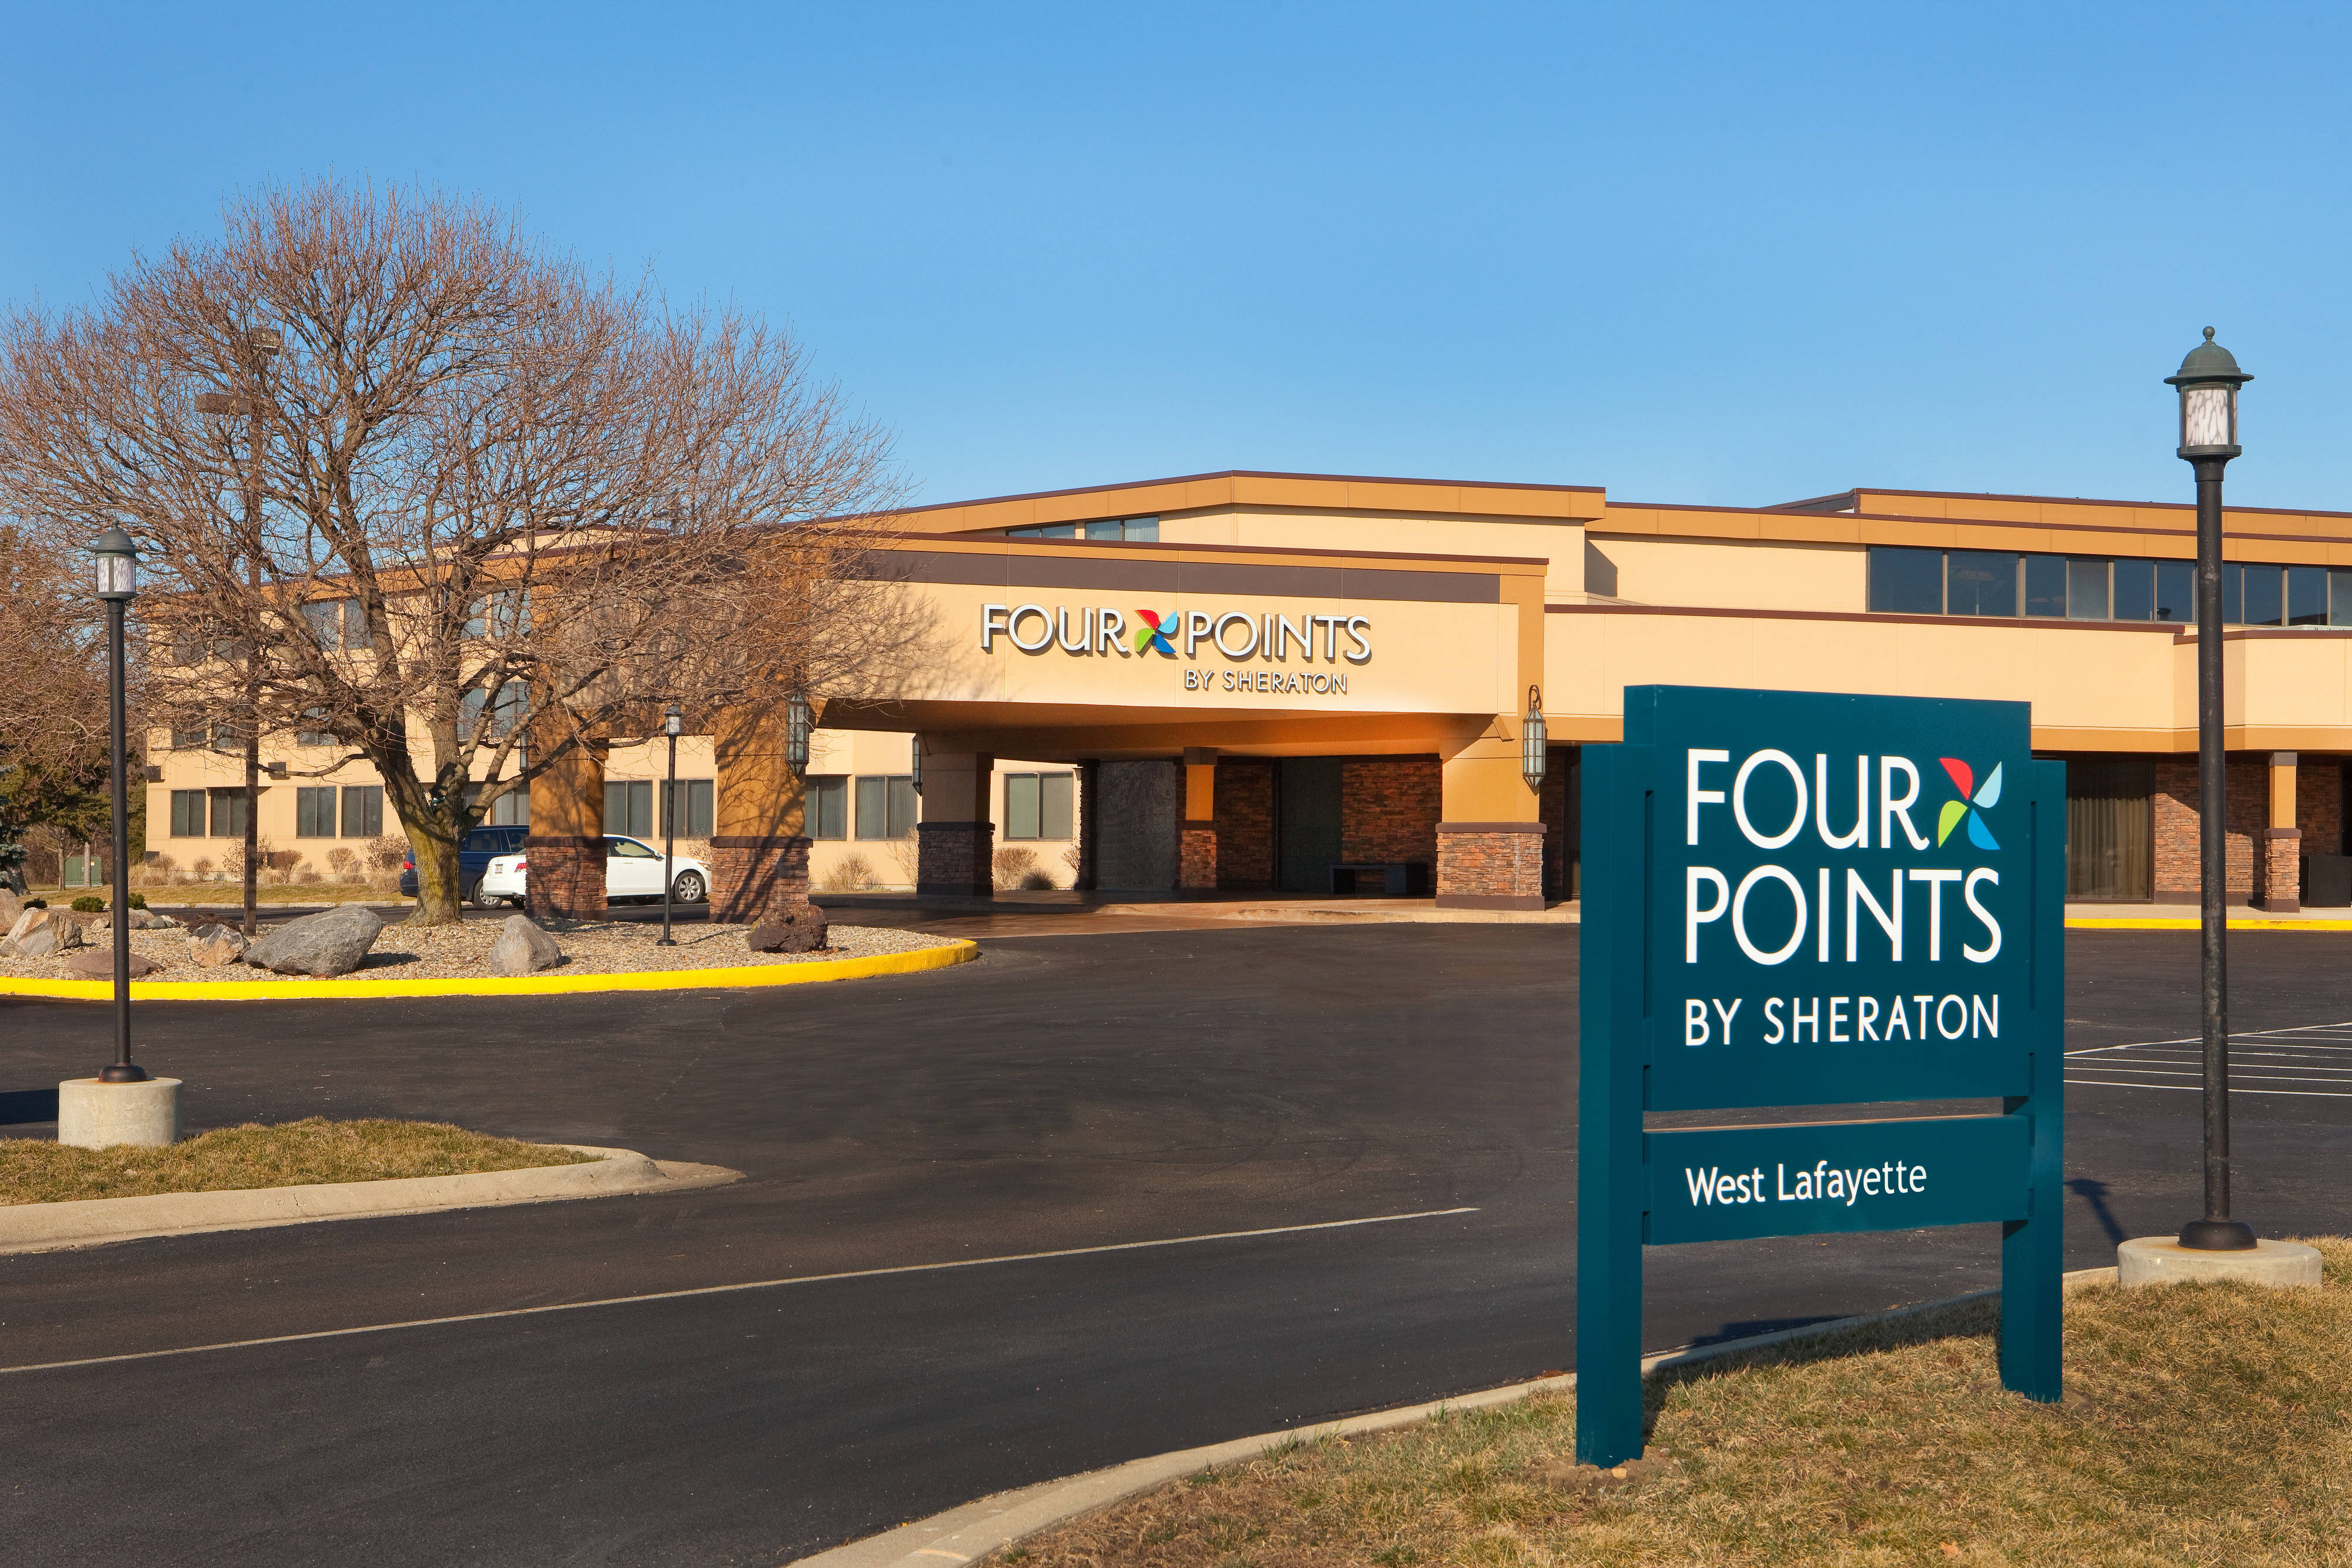 Photo of Four Points by Sheraton West Lafayette, West Lafayette, IN